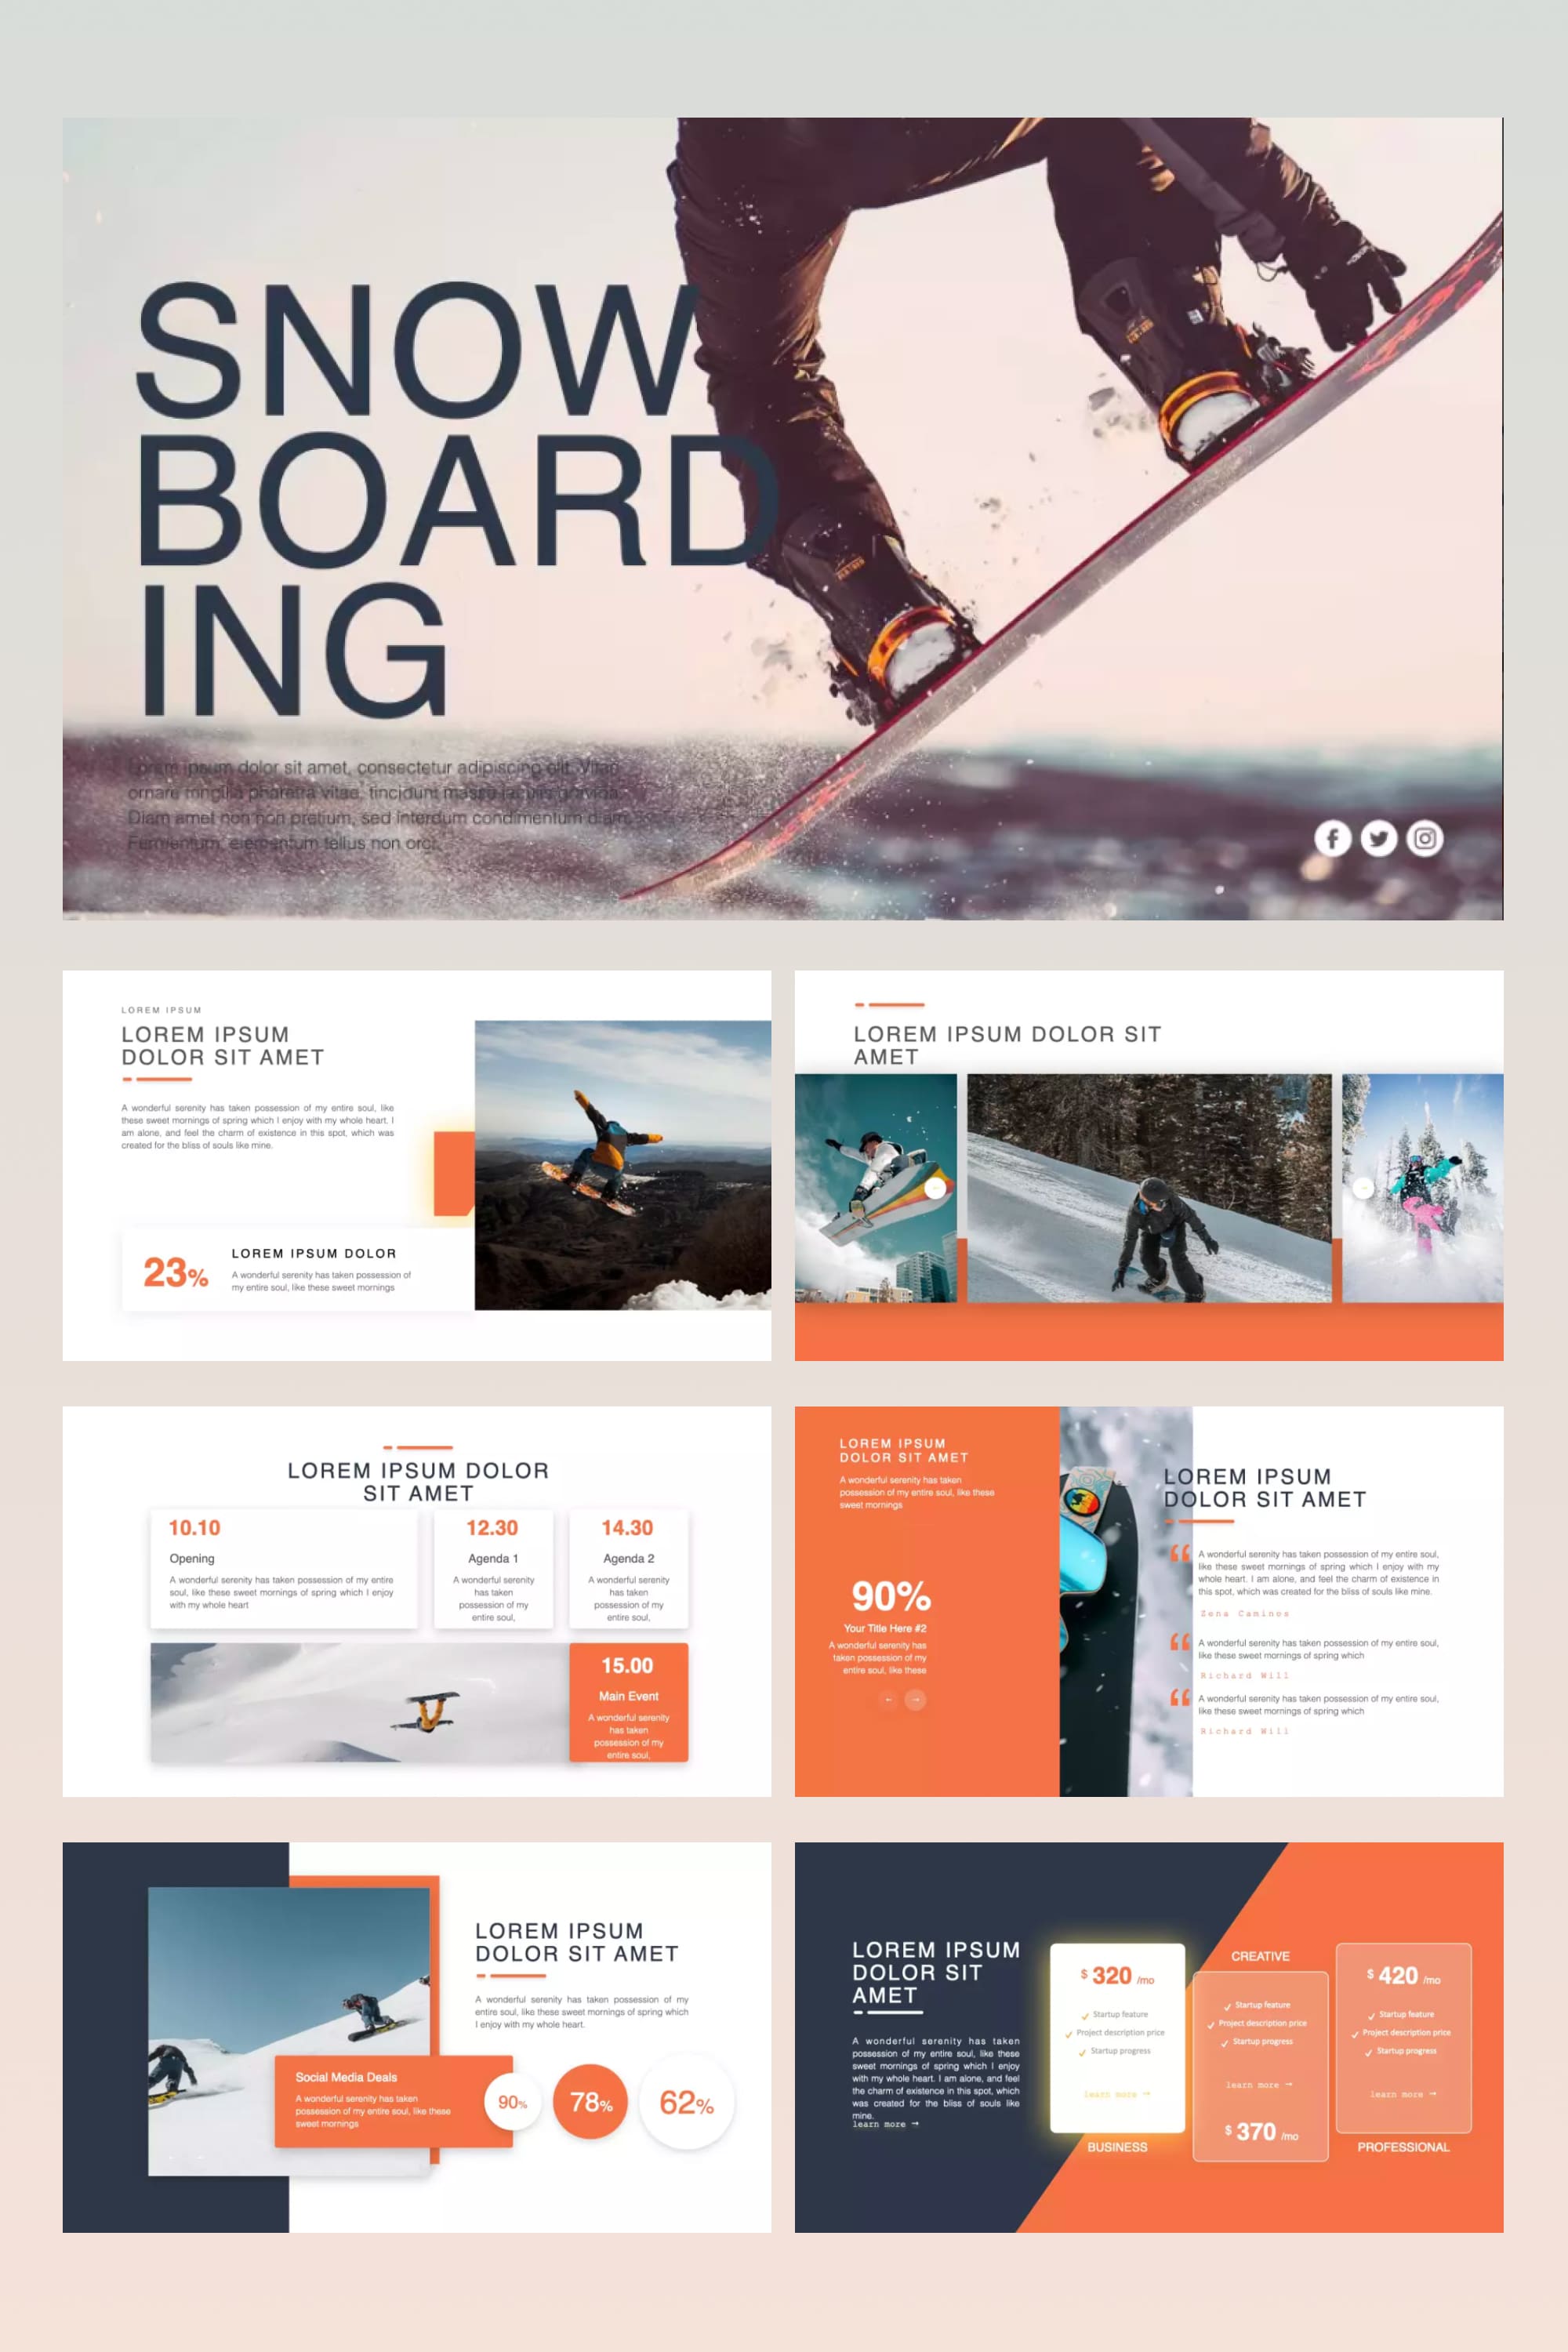 Mix of presentation pages with white background, orange margins and photos of snowboarders.